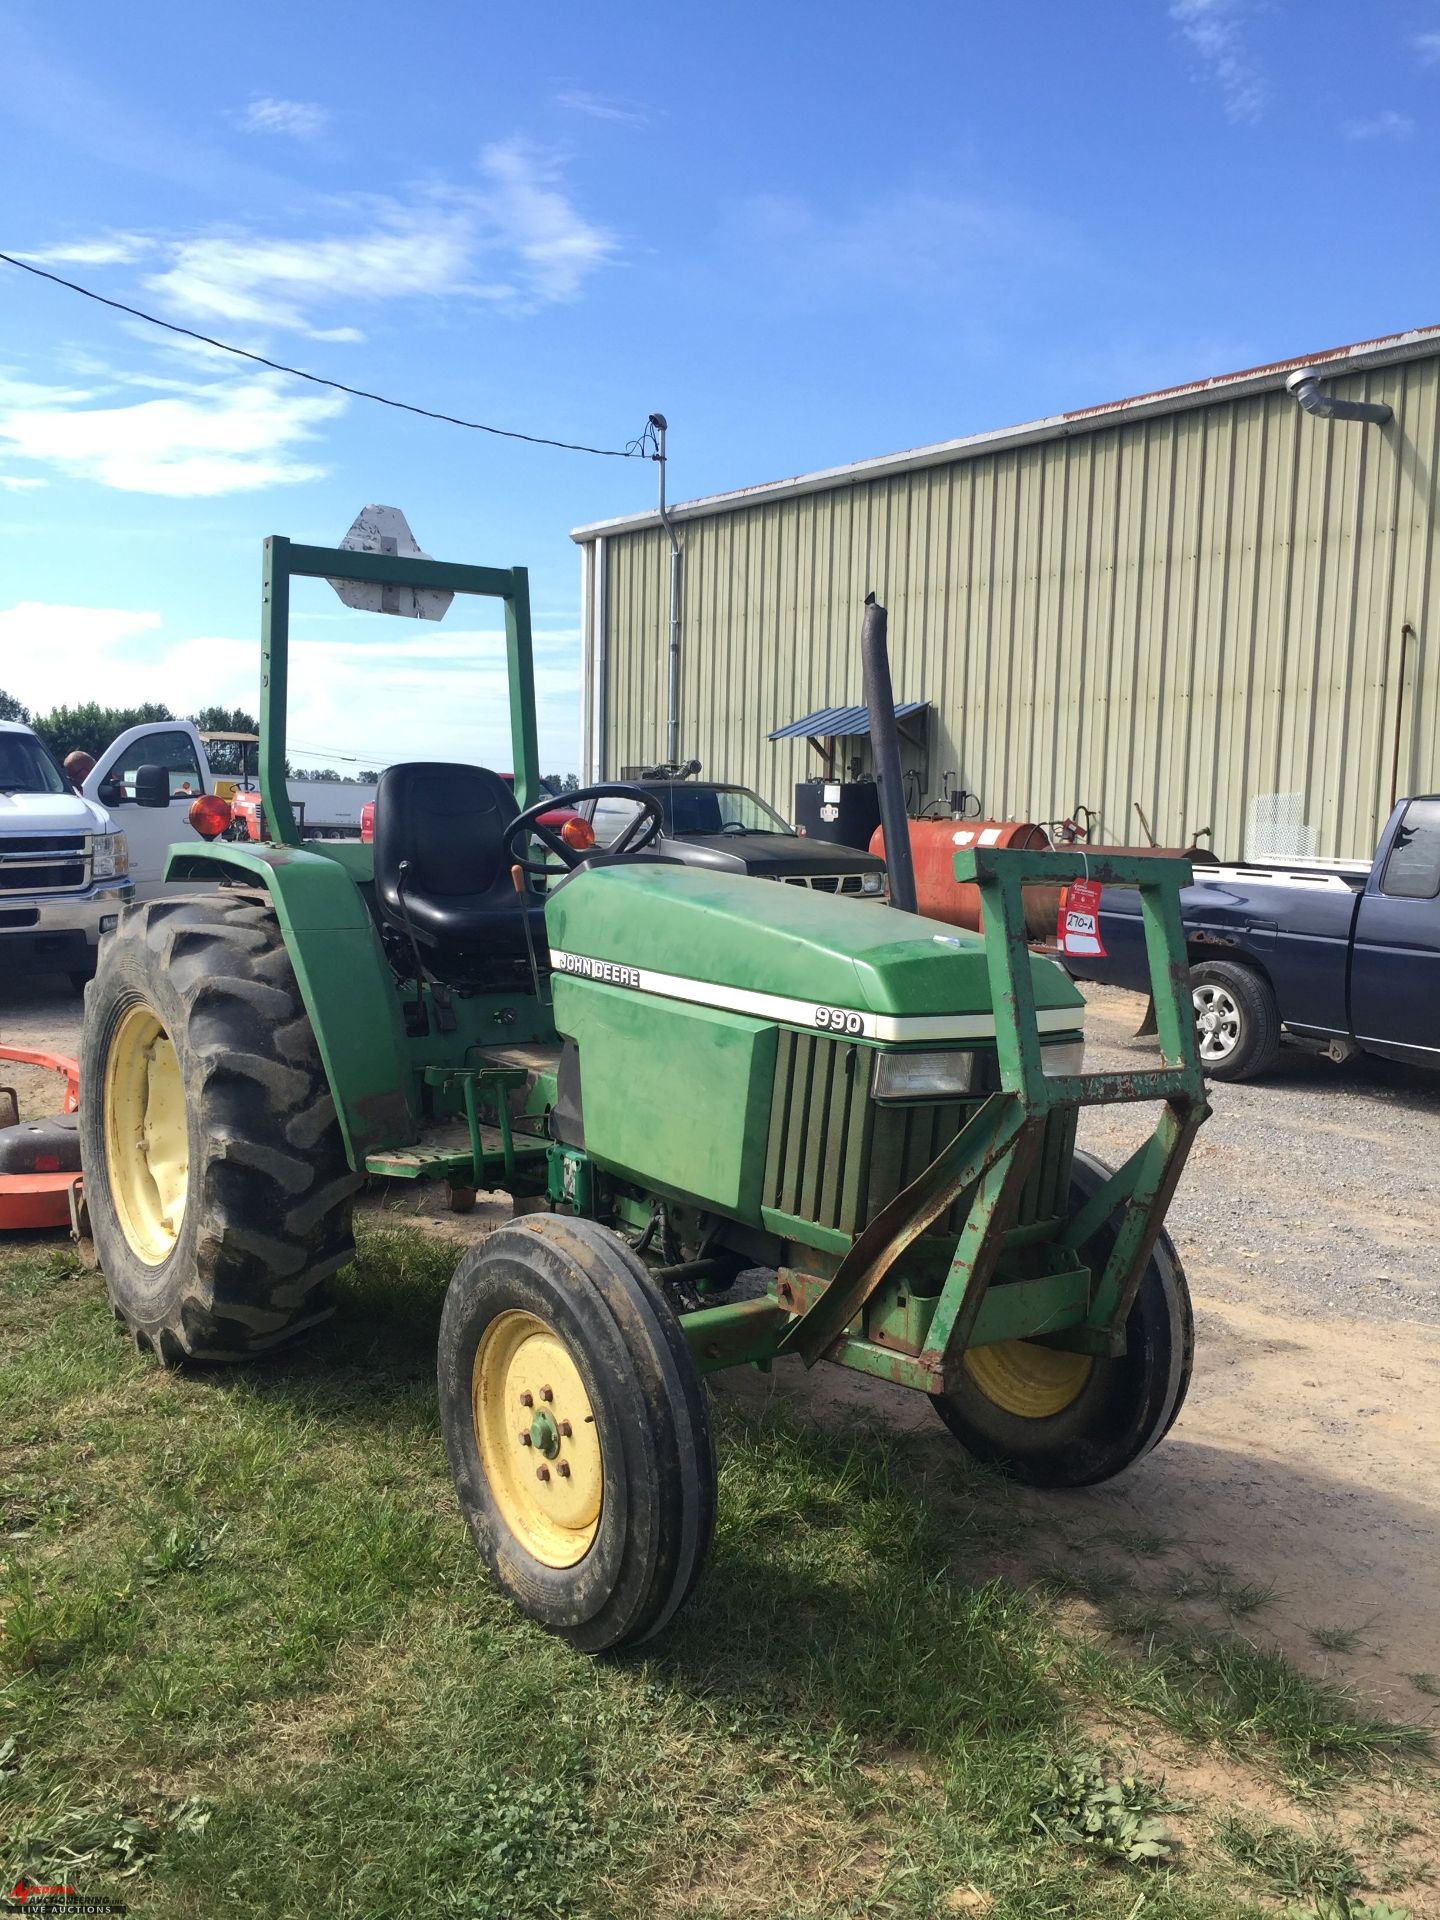 2001 JOHN DEERE 990 TRACTOR, 3PT, PTO, 14.9-24 REAR TIRES, 5124 HOURS SHOWING (HOURS SUBJECT TO - Image 2 of 7